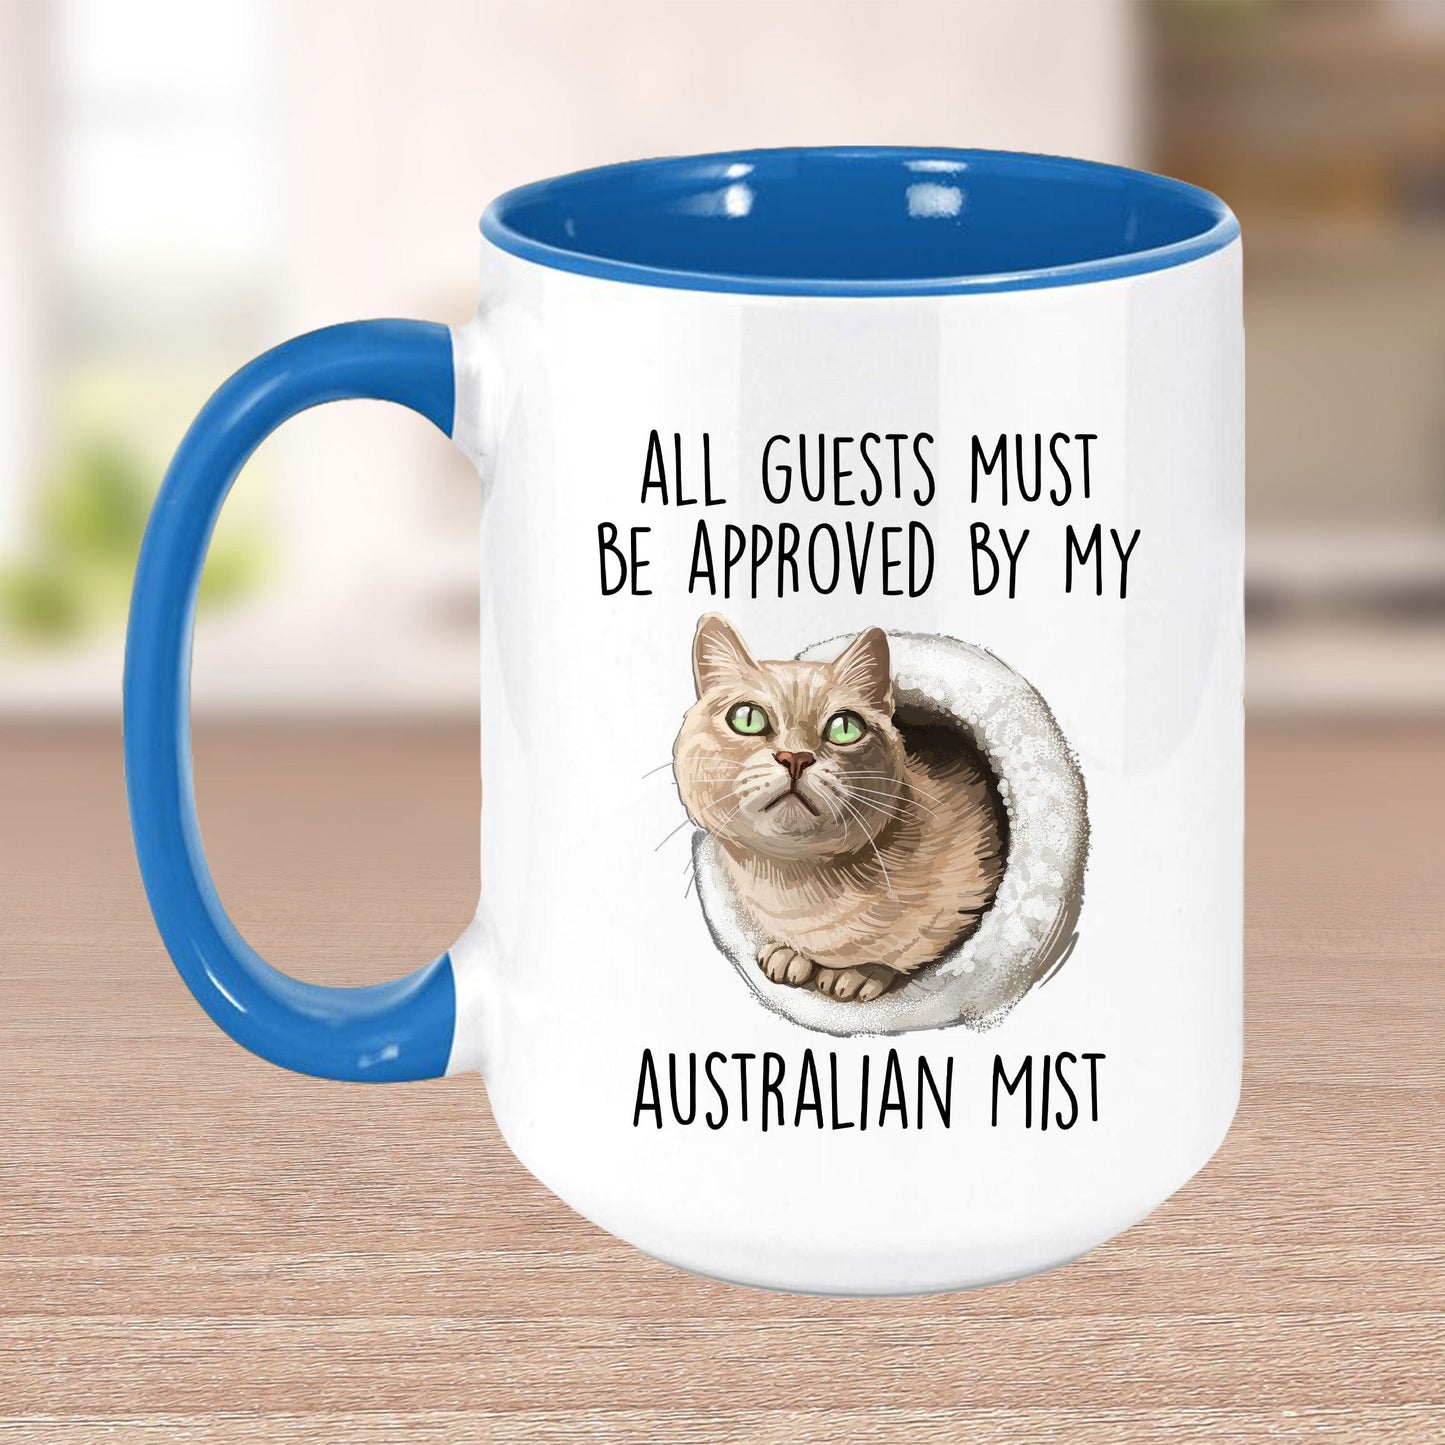 Australian Mist Cat Funny Coffee Mug - All Guests Must Be Approved